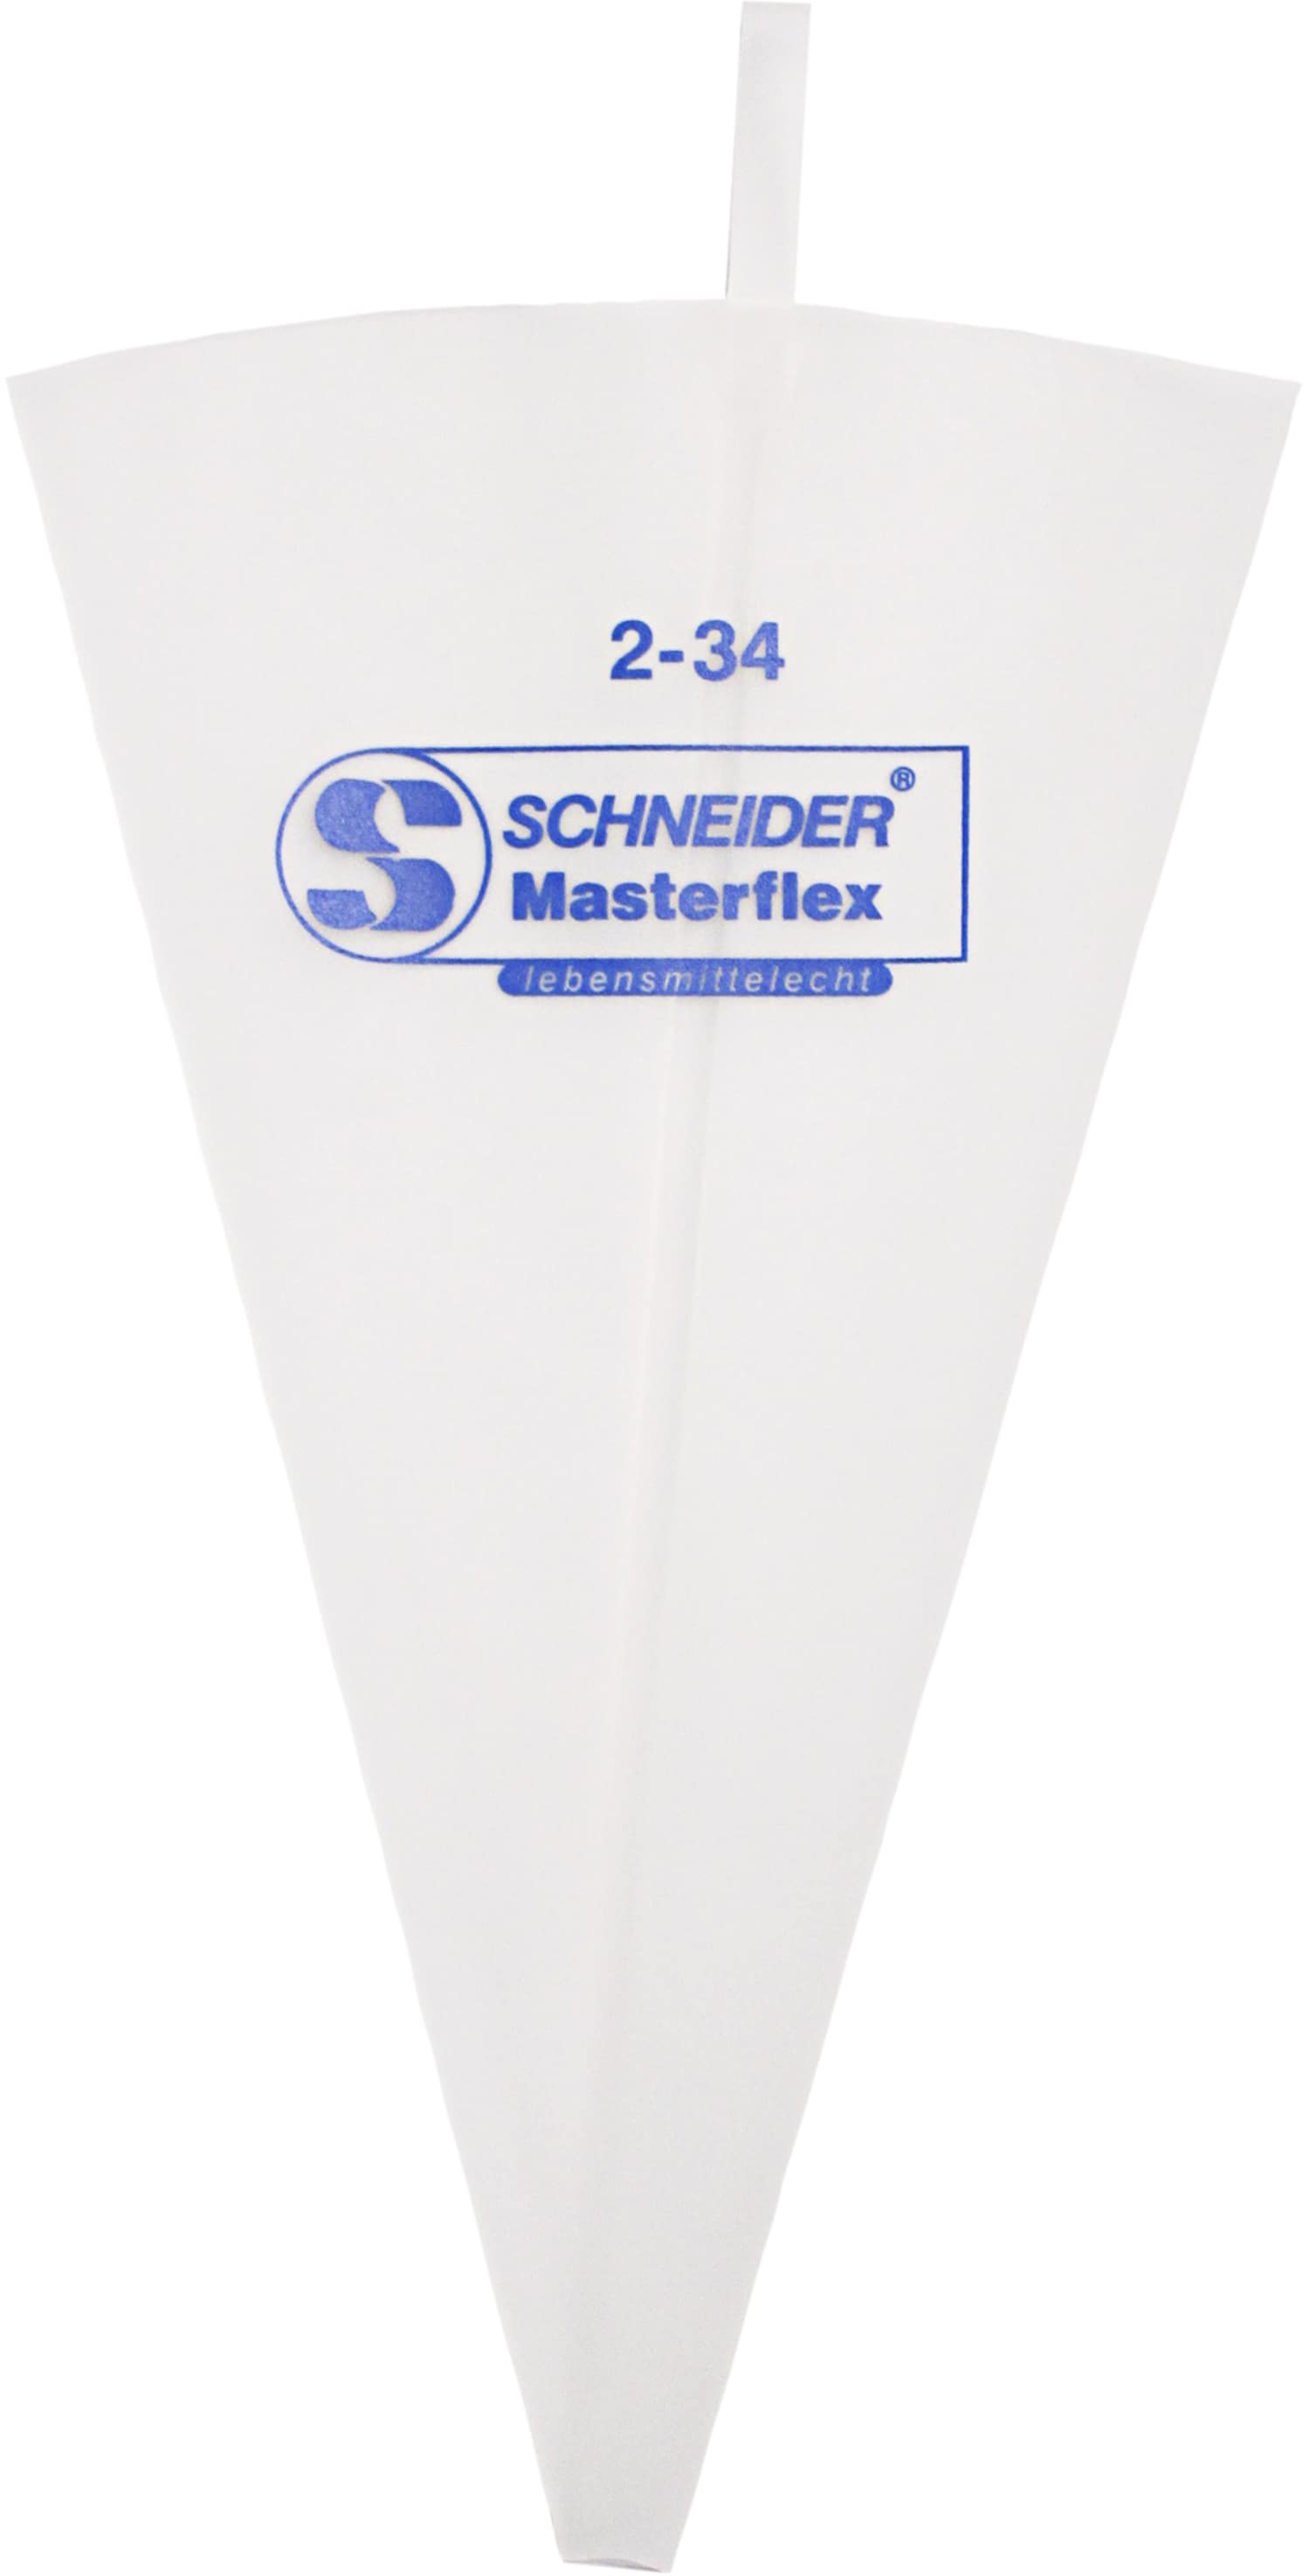 Pastry bags "MASTERFLEX"